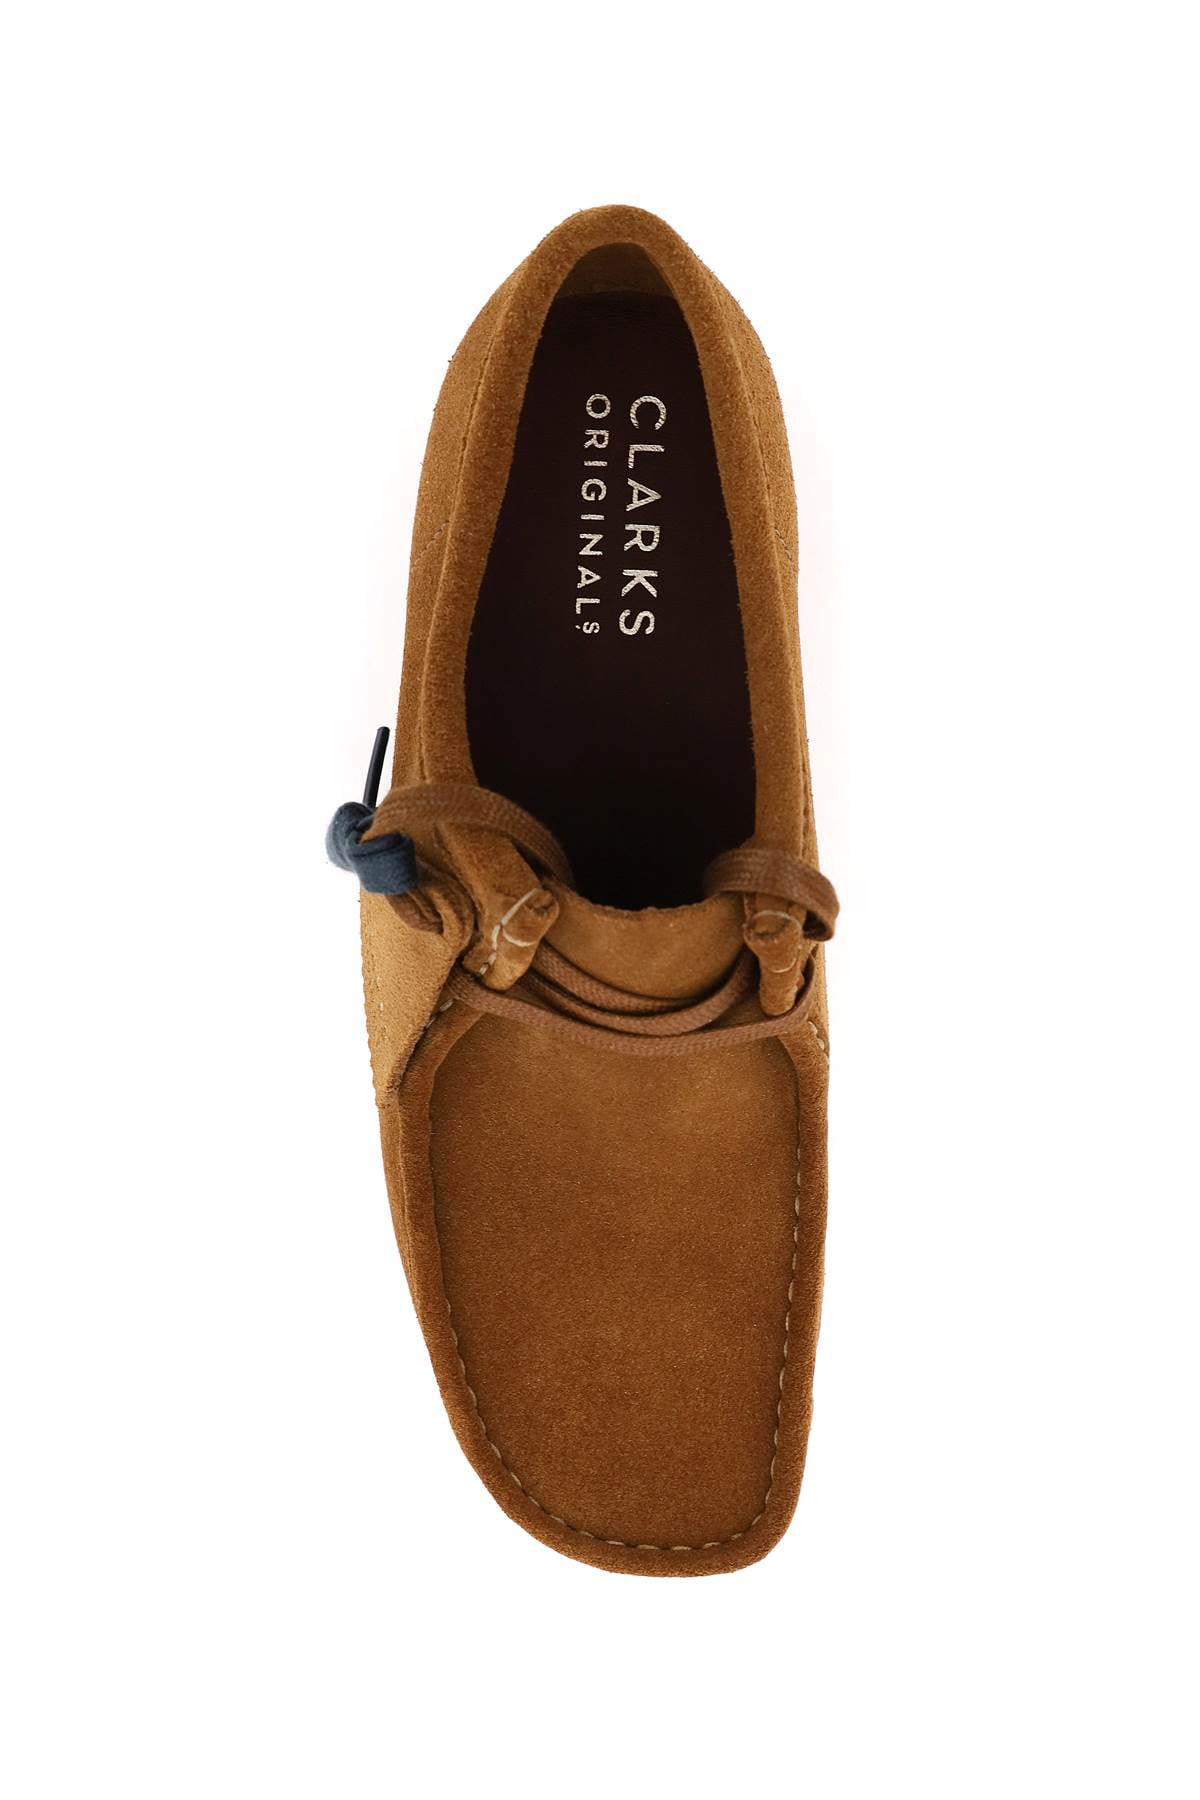 Lace-ups shoes Clarks - Wallabee suede lace-ups - 168668COLA